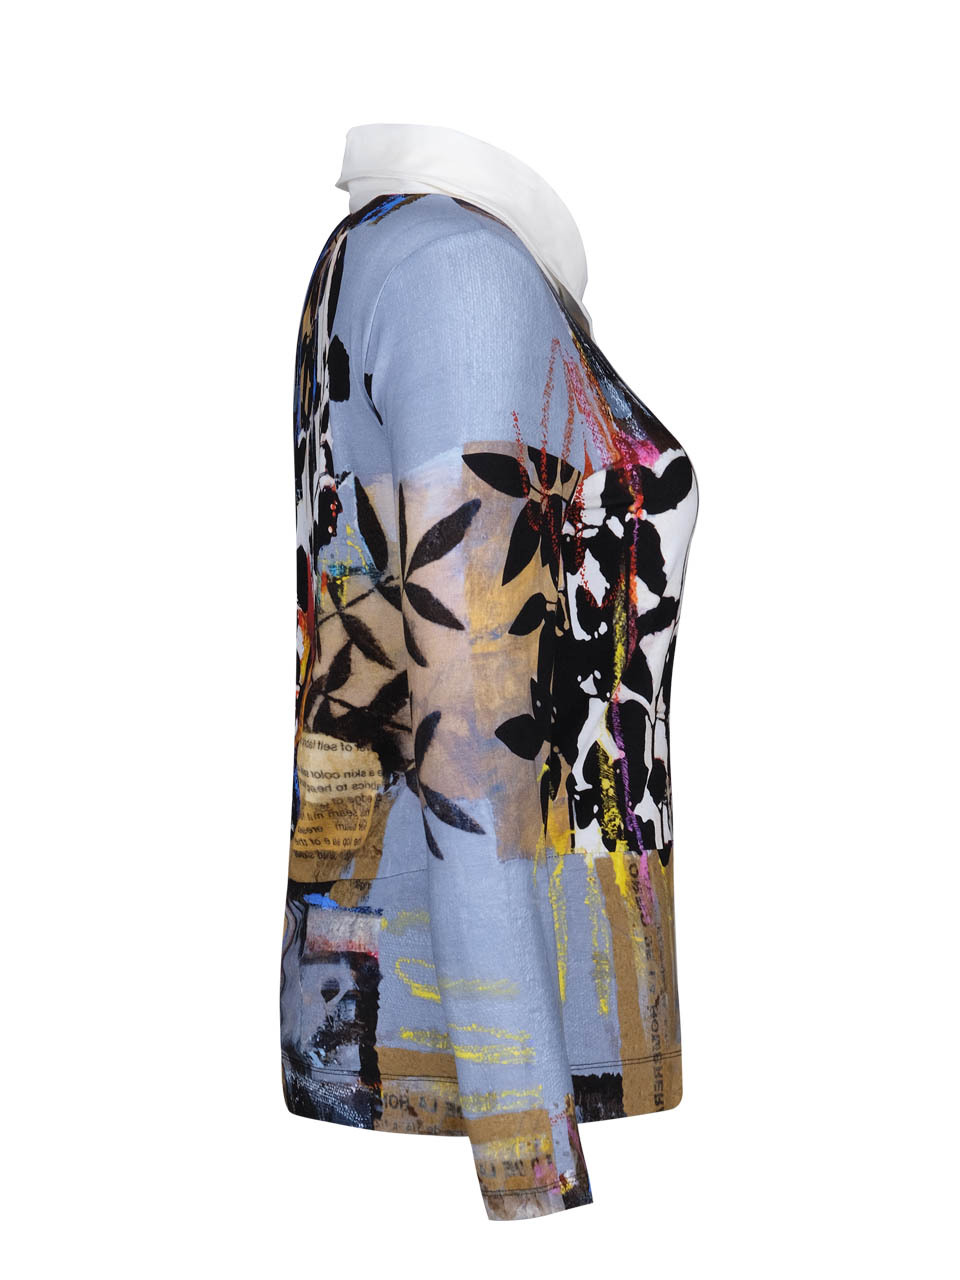 Simply Art Dolcezza: Split Cowl Neck Double OO Abstract Art Sweater Tunic (2 Left!)